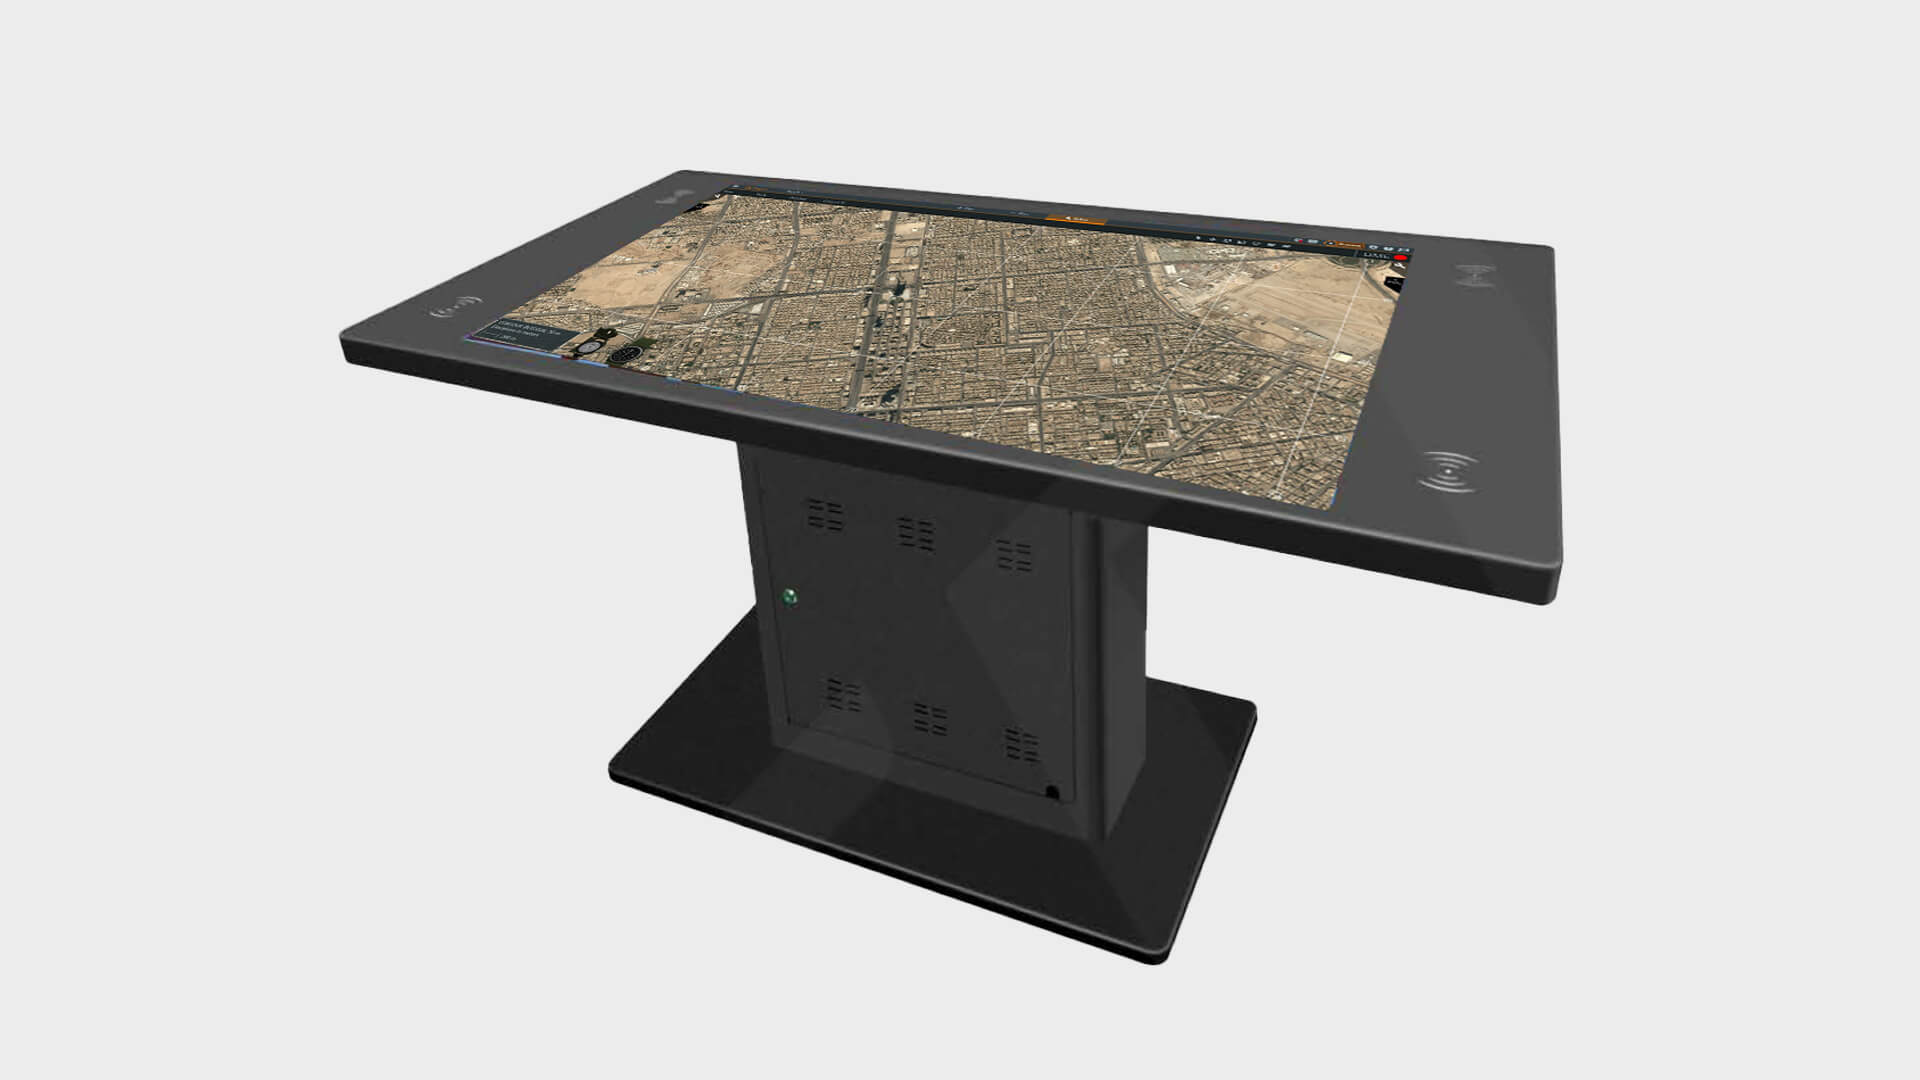 4K TOUCH SCREEN COMMAND SYSTEM